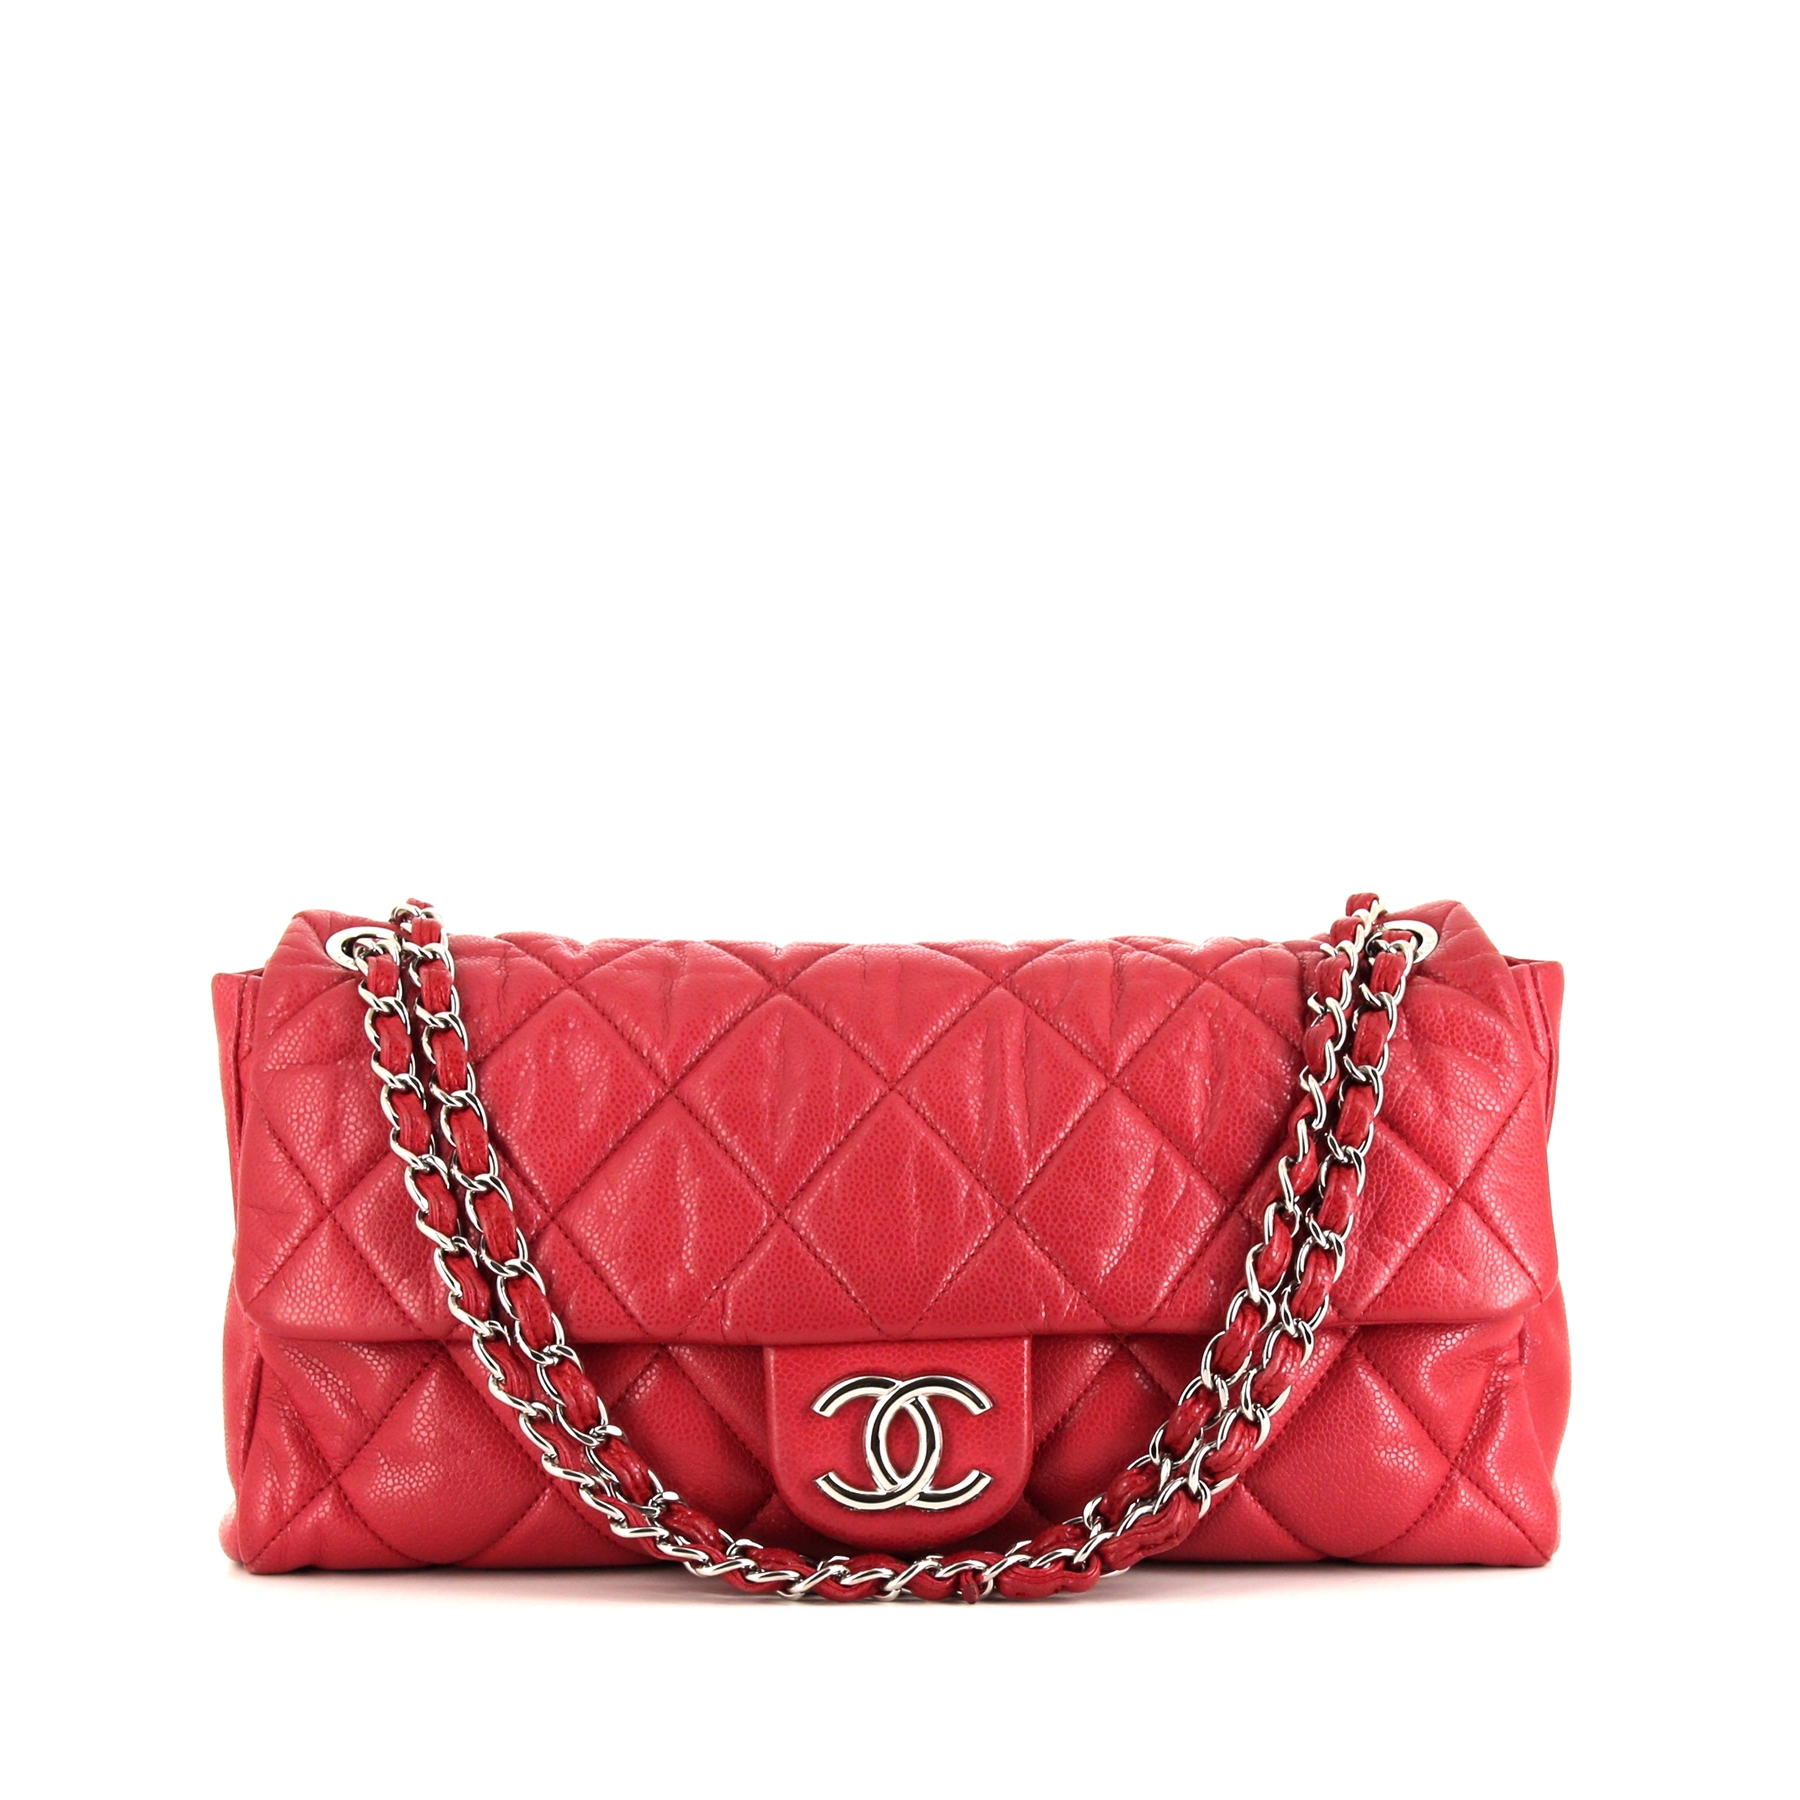 Baguette Handbag In Red Quilted Grained Leather